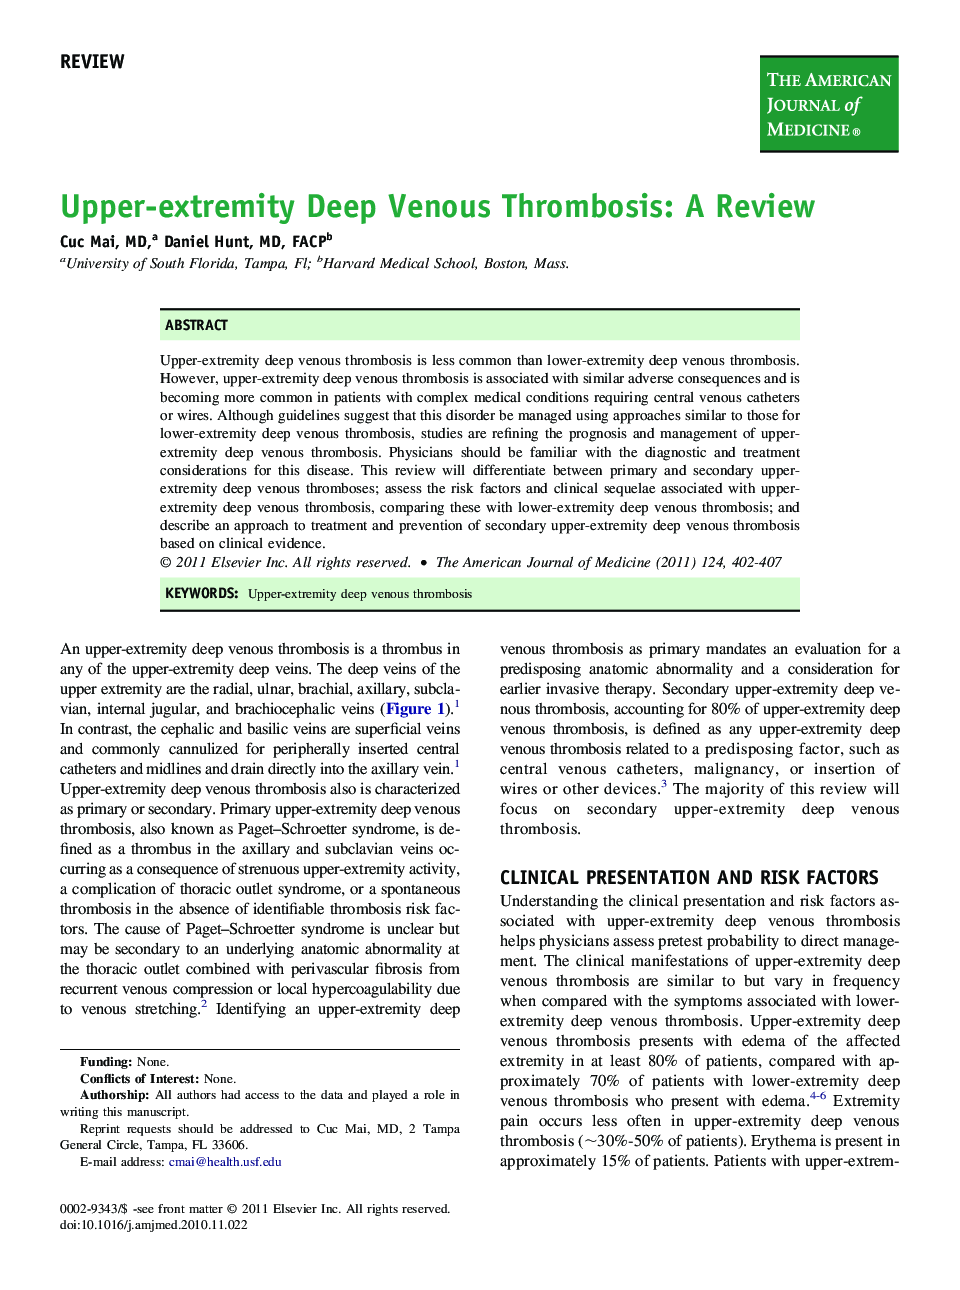 Upper-extremity Deep Venous Thrombosis: A Review 